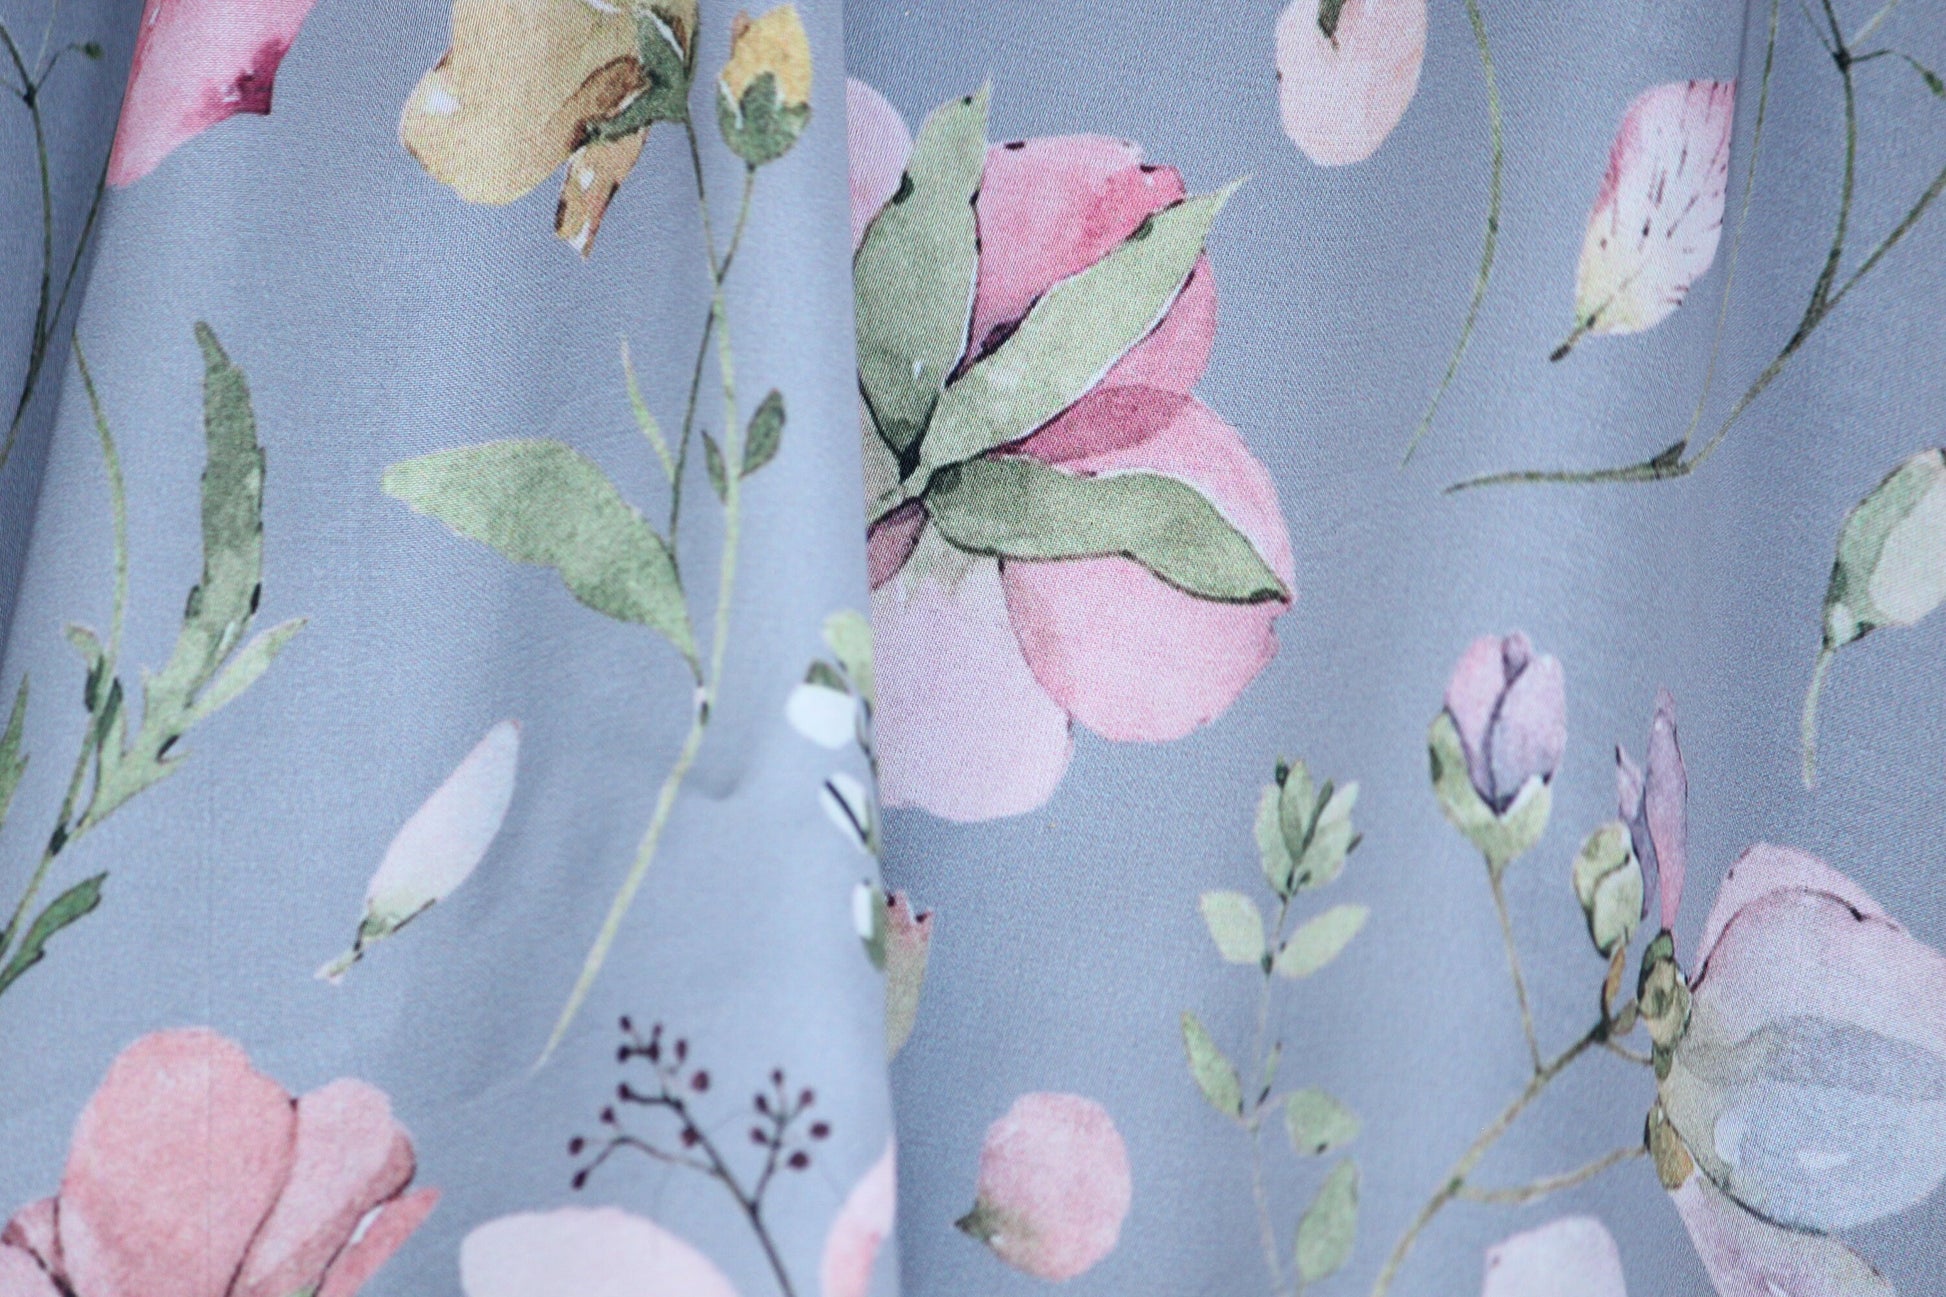 1 yard-Slate grey satin charmeuse fabric by the yard-watercolor look floral printed satin fabric-print pink floral fabric